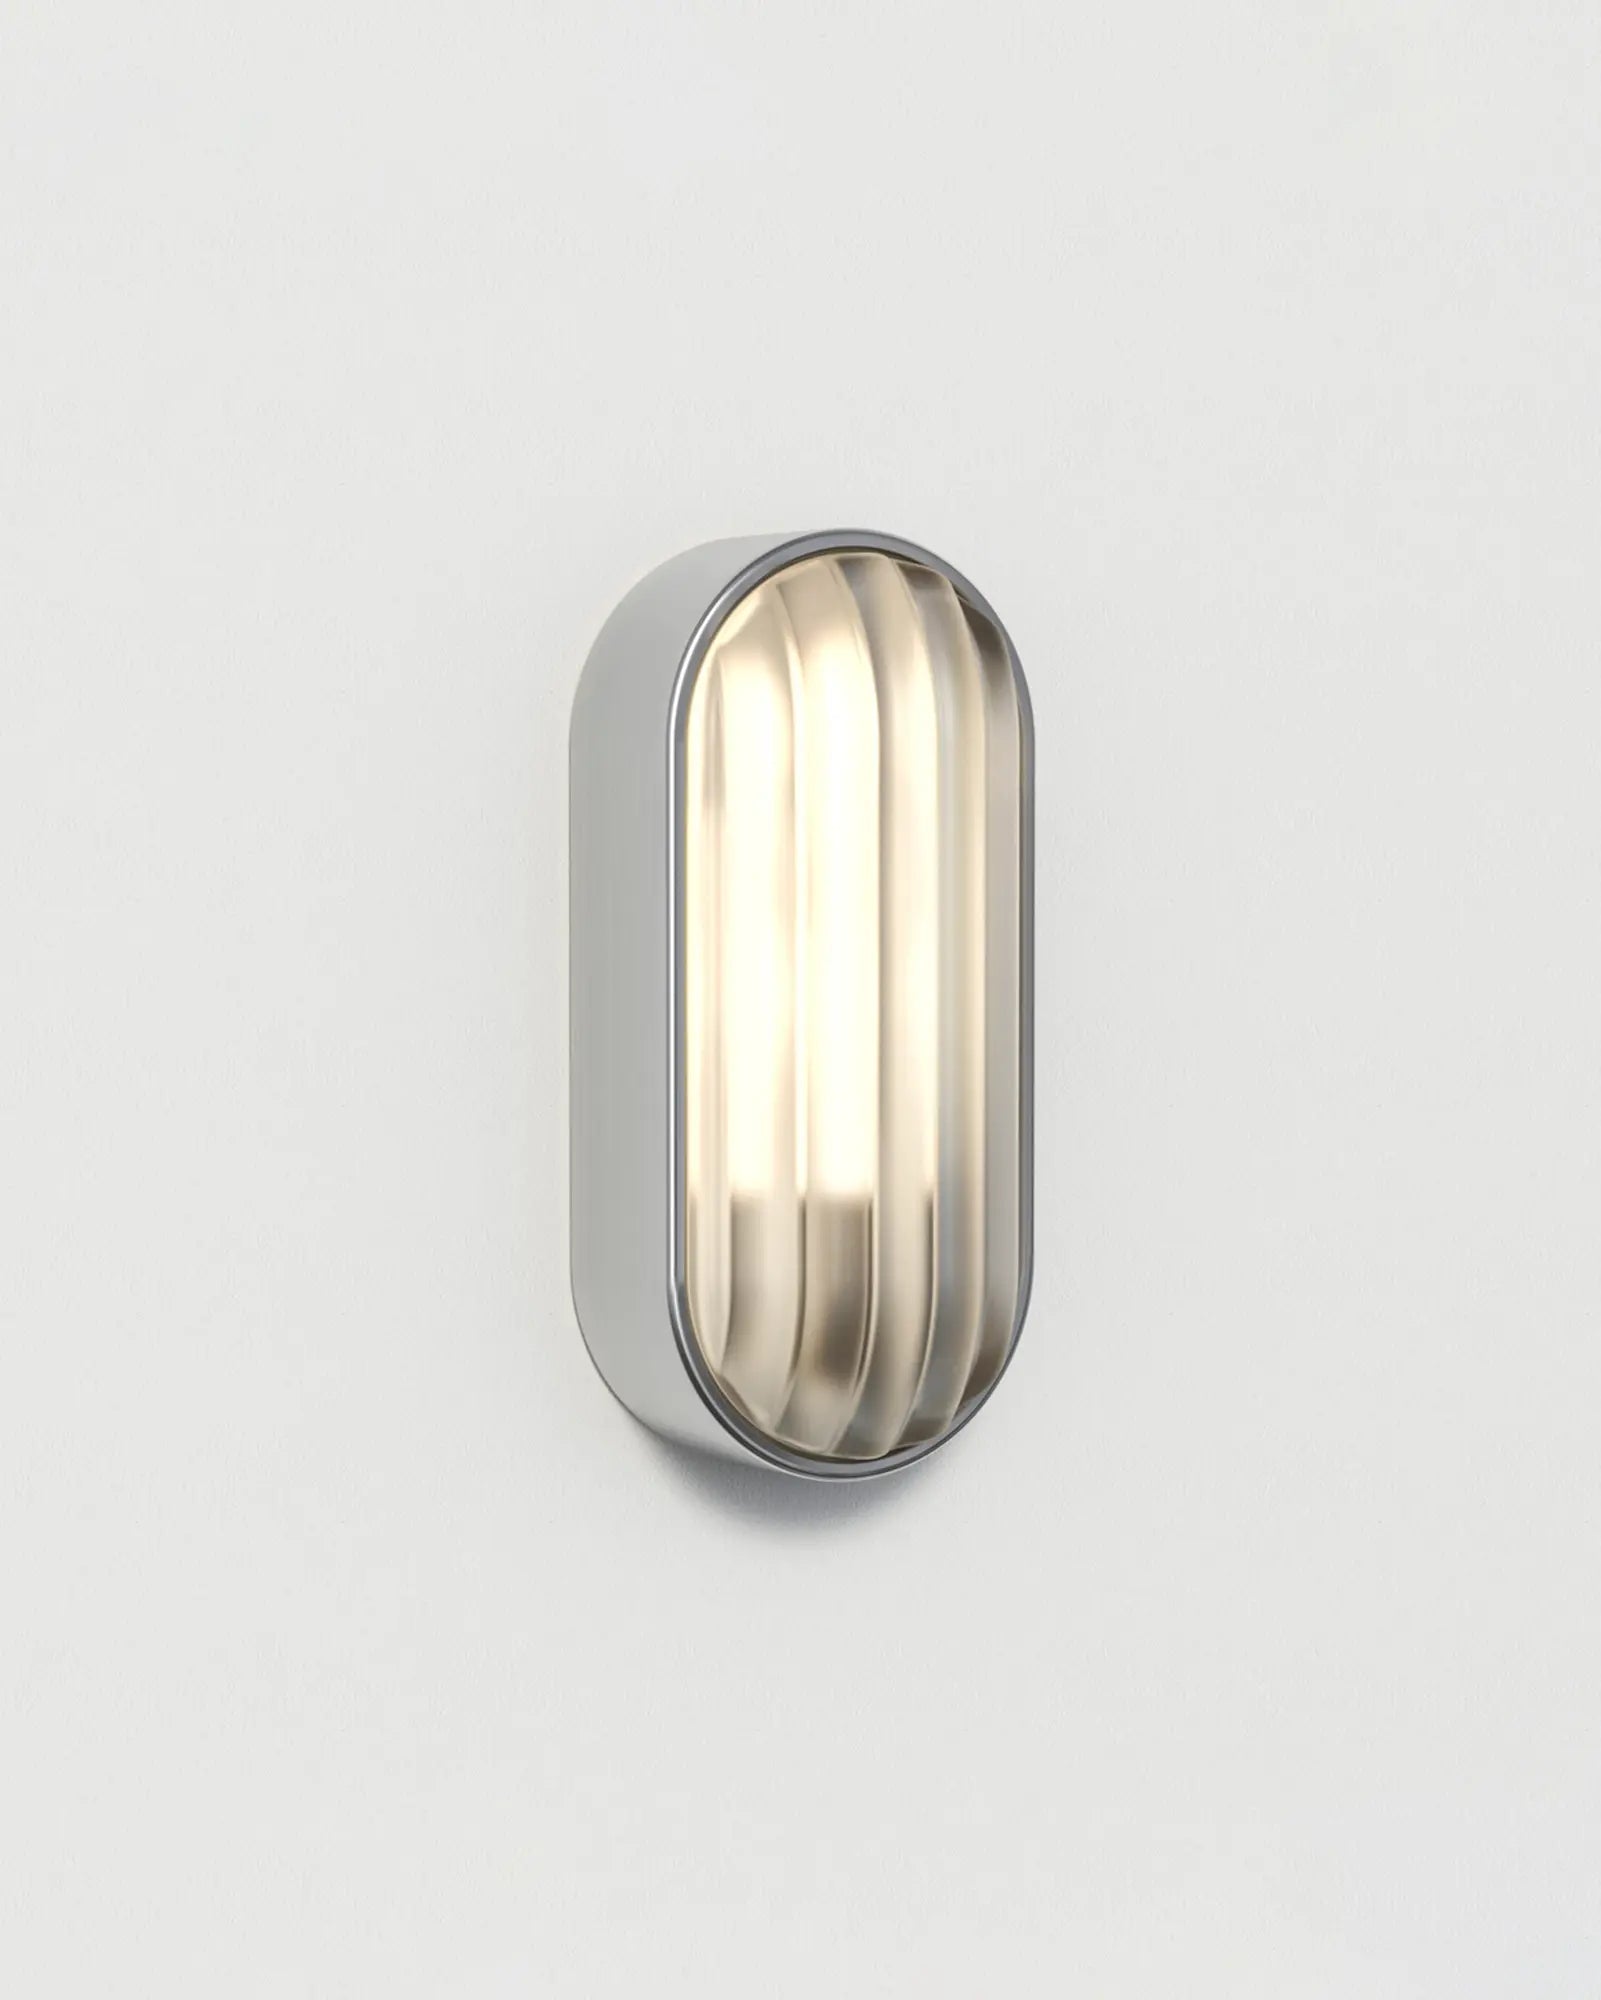 Montreal Oval outdoor wall and ceiling light